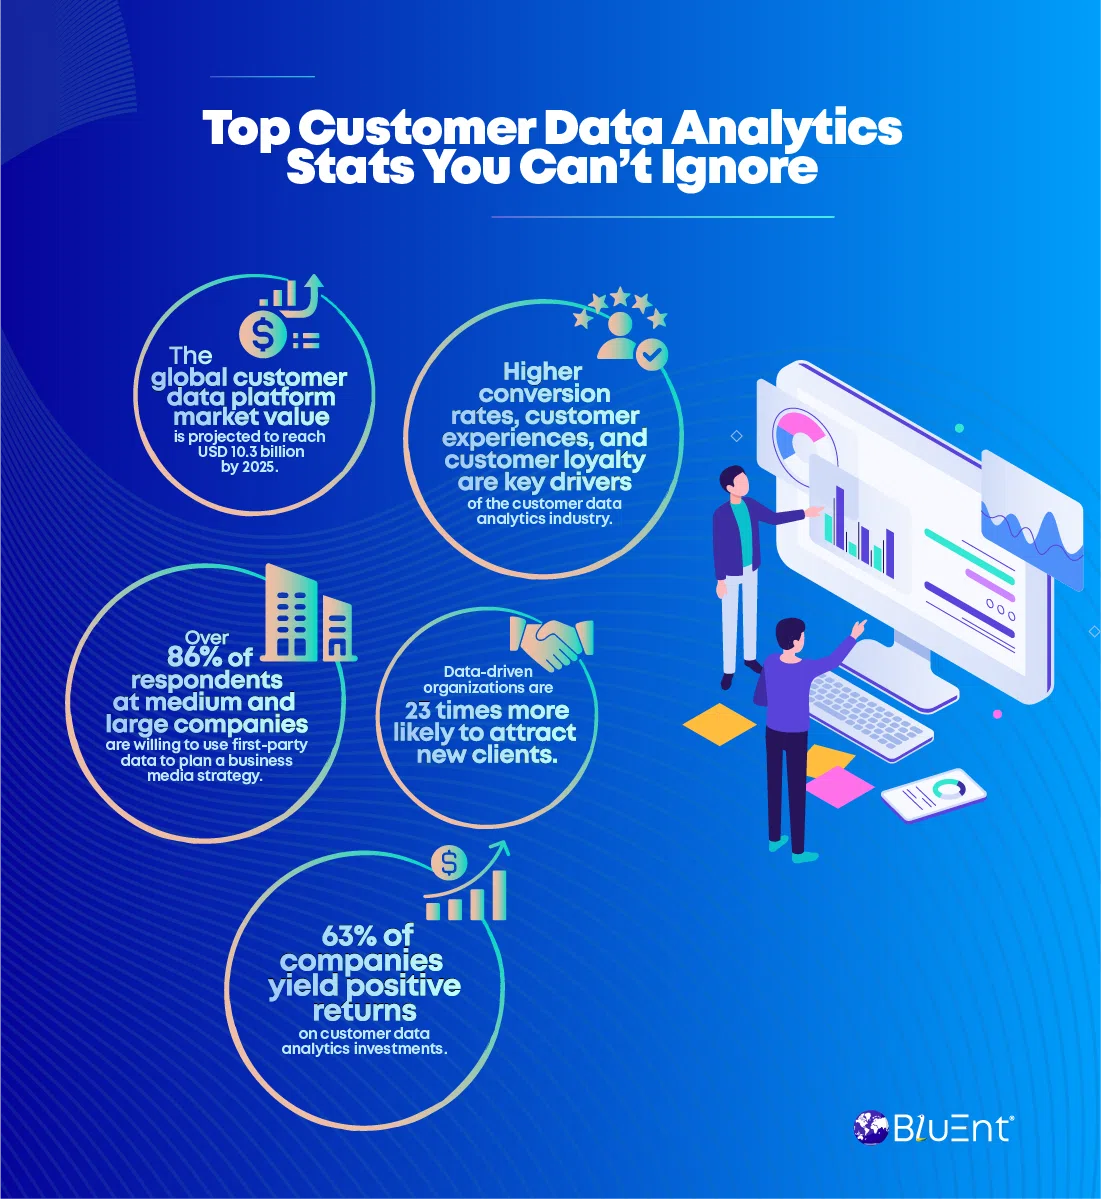 Top statistics on customer data analytics you cannot ignore